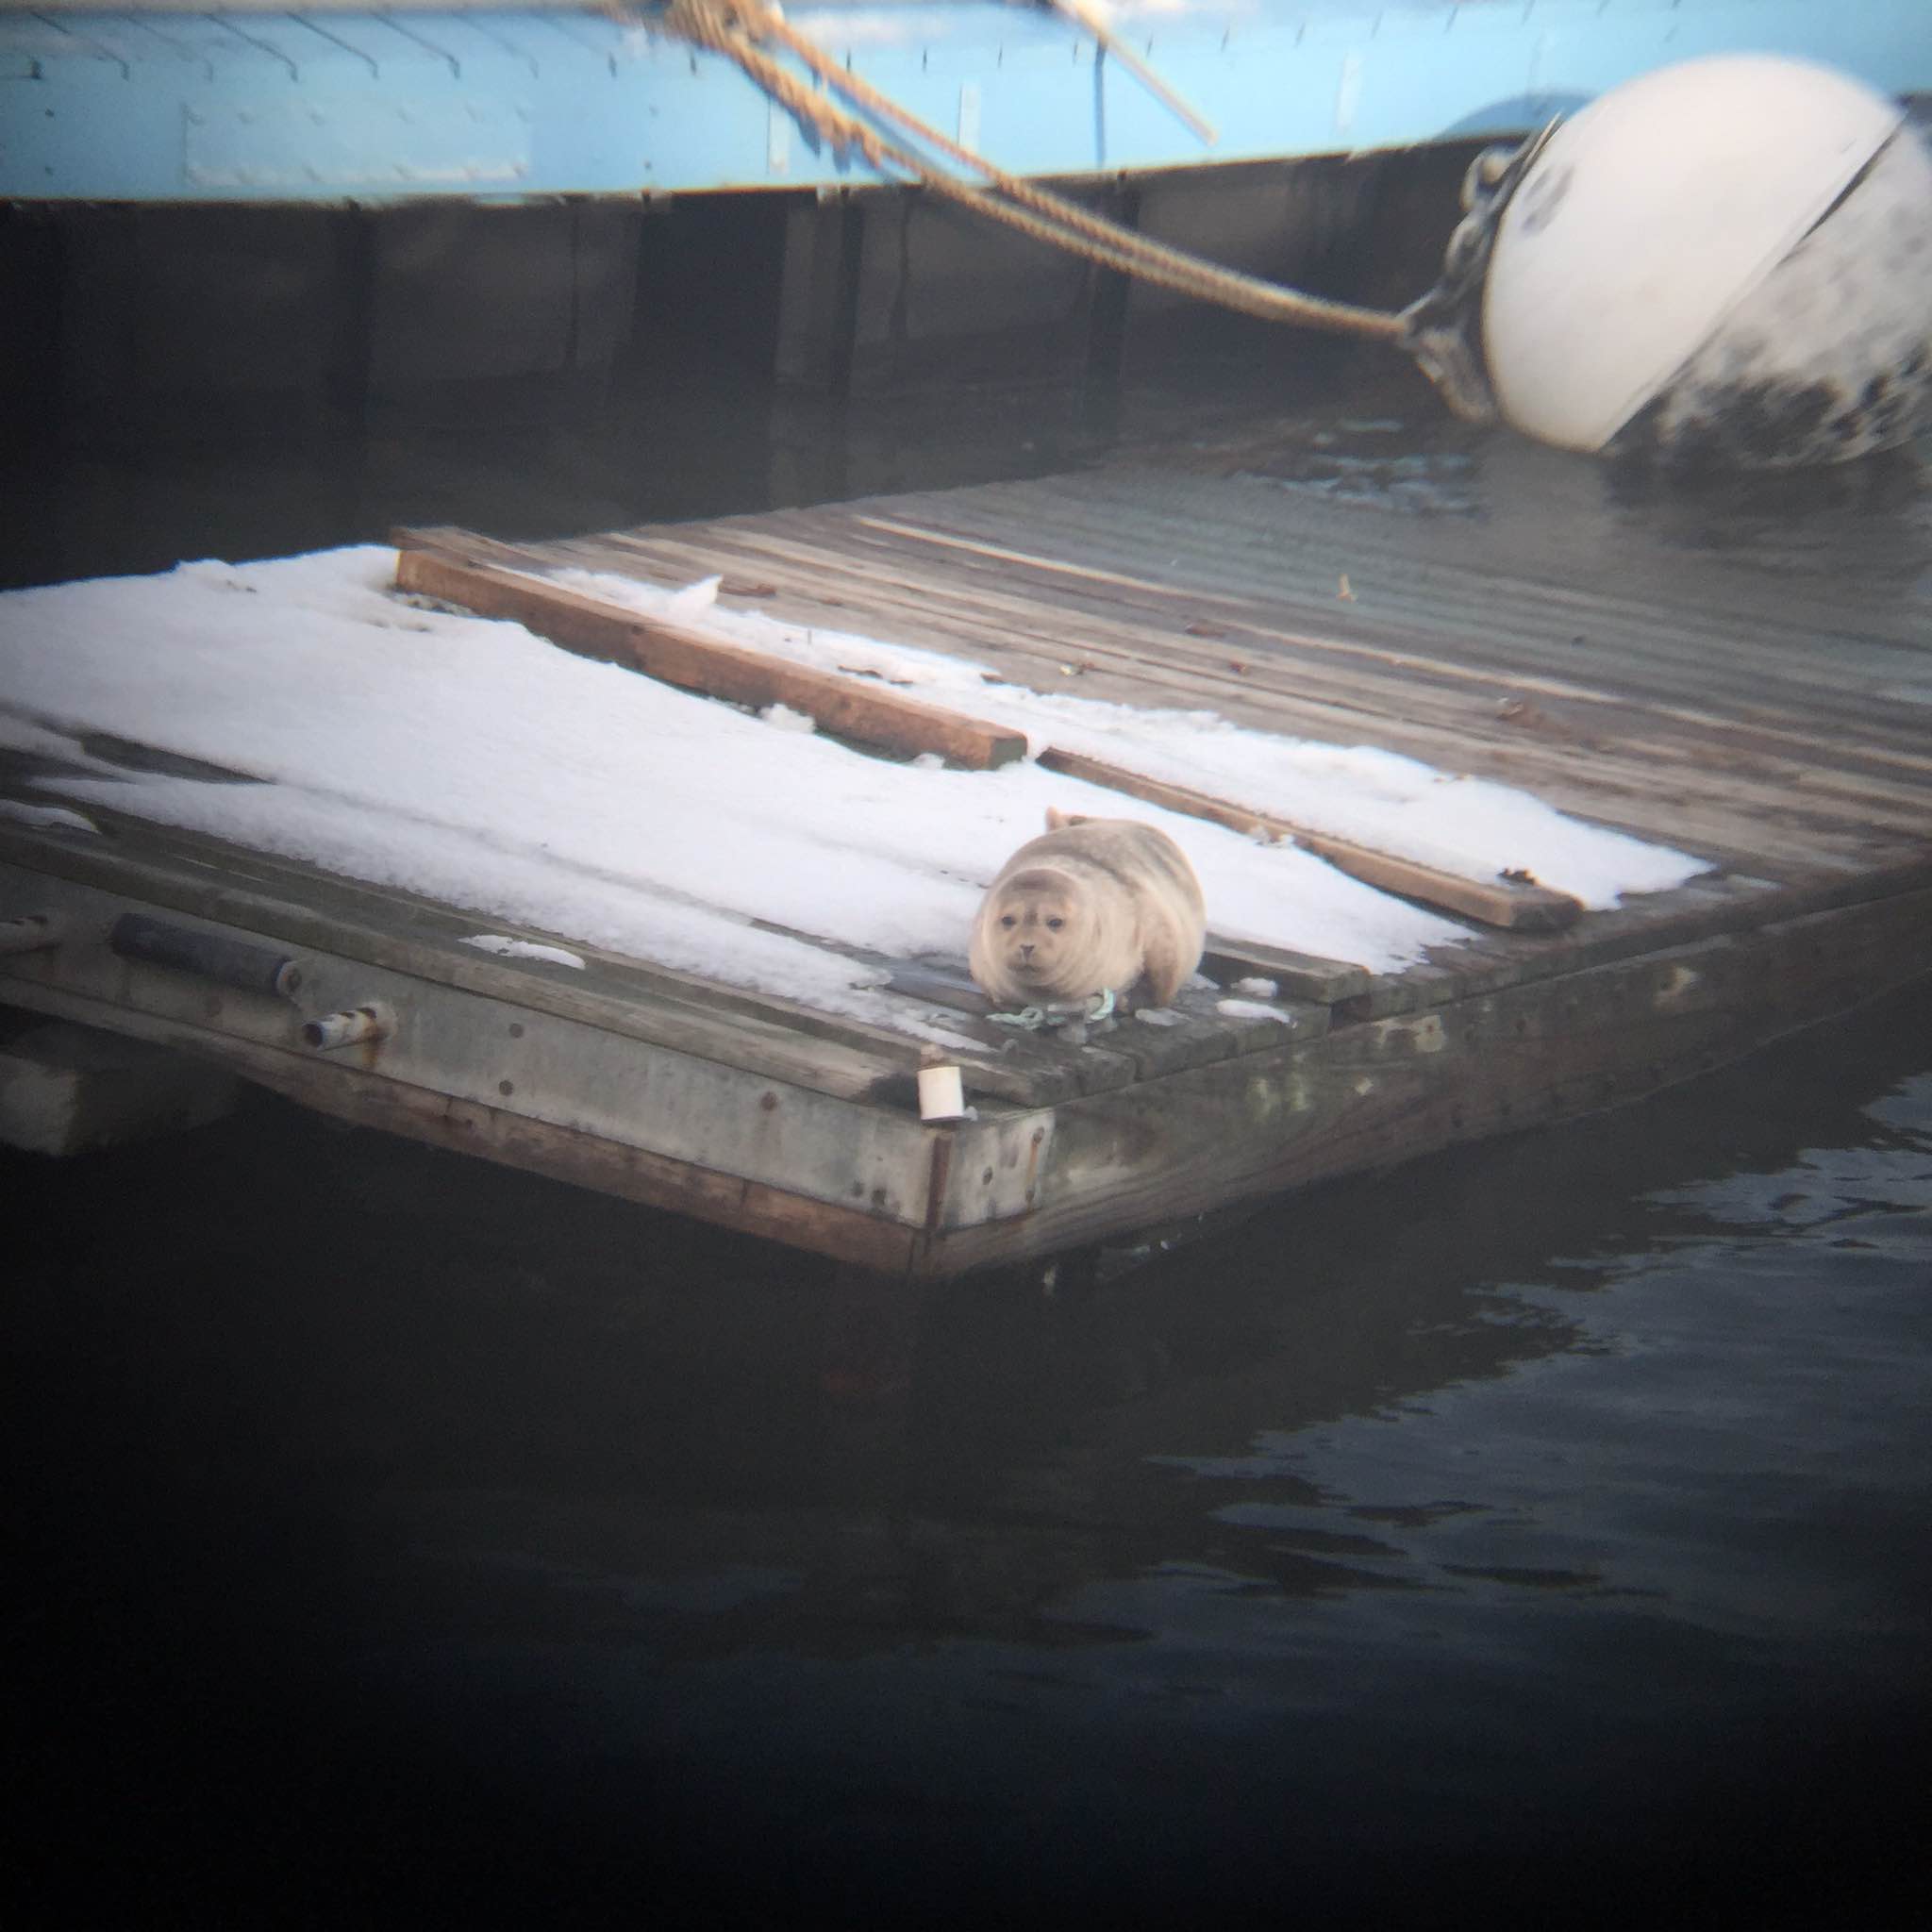 Harbor seal on a Governors Island dock in February 2015. Credit Ketelyn Fong, Class of 2015, NYHS.